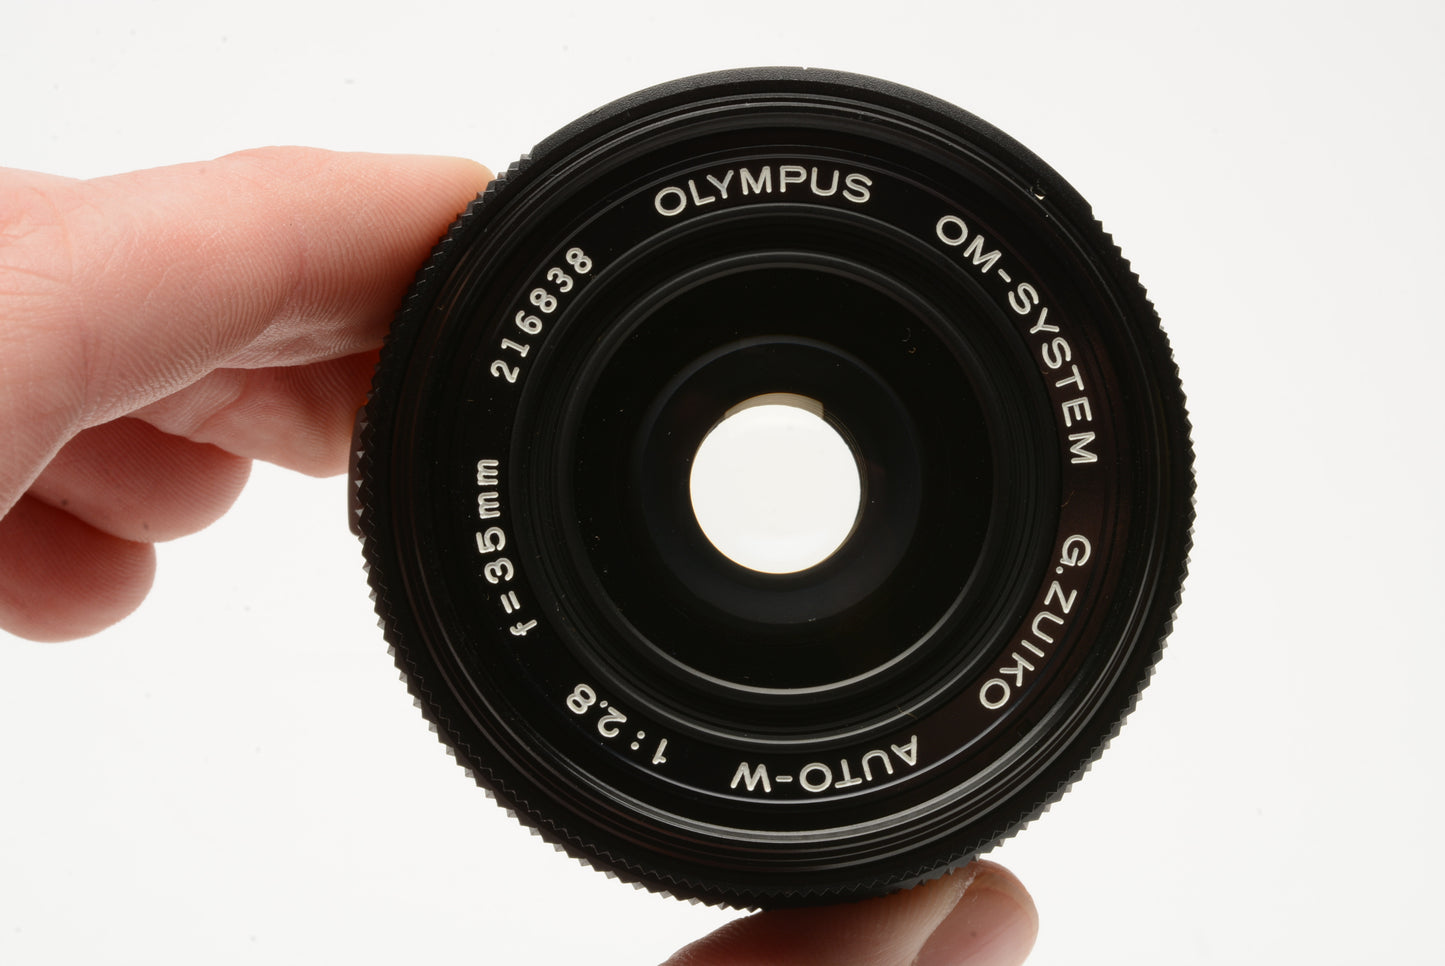 Olympus OM-System 35mm f2.8 wide angle lens, caps + case